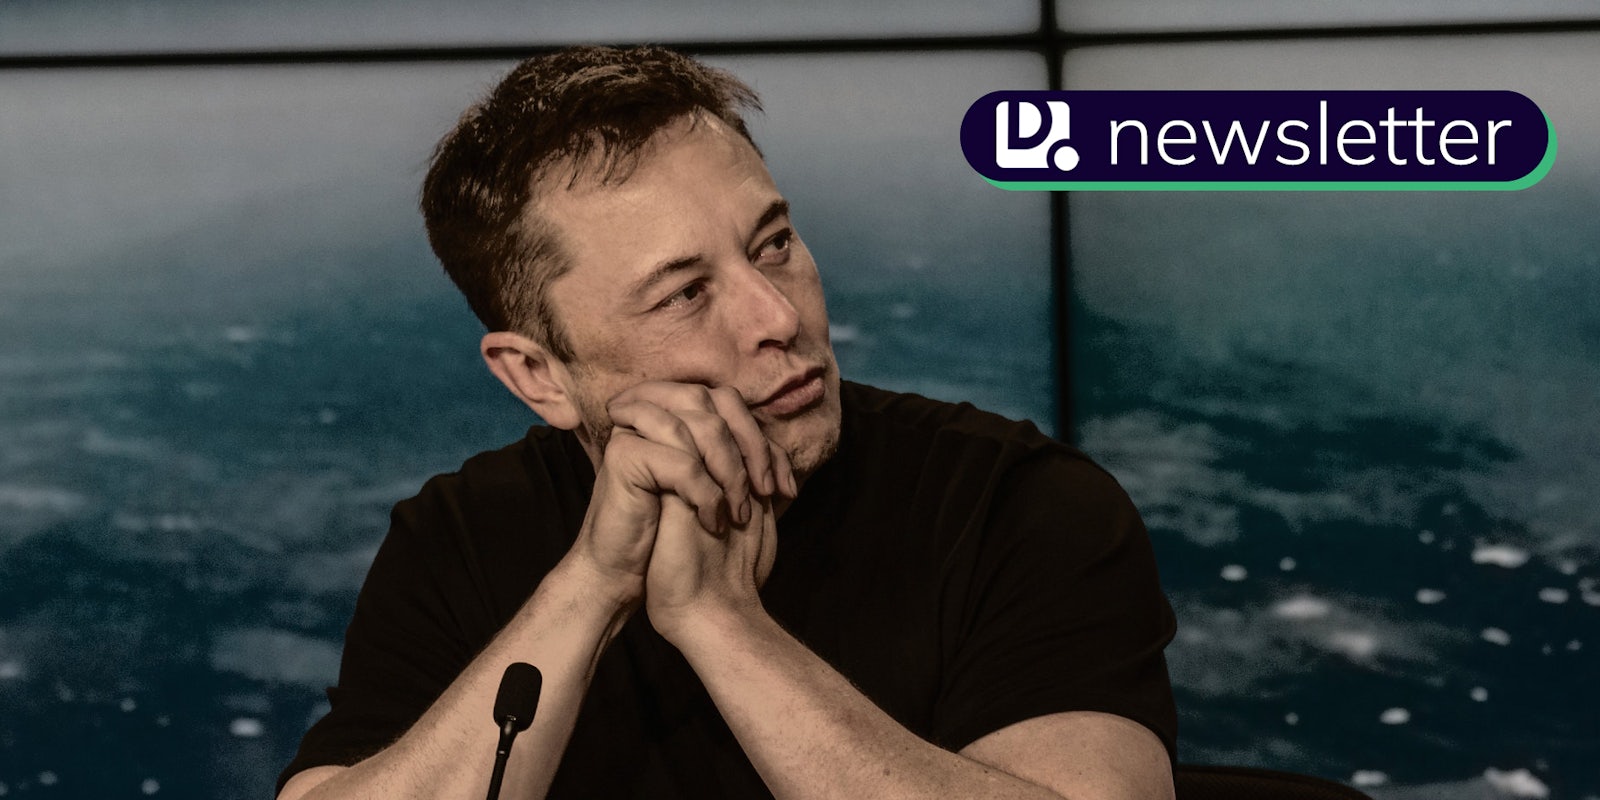 Elon Musk with folded hands. The Daily Dot newsletter logo is in the top right corner.